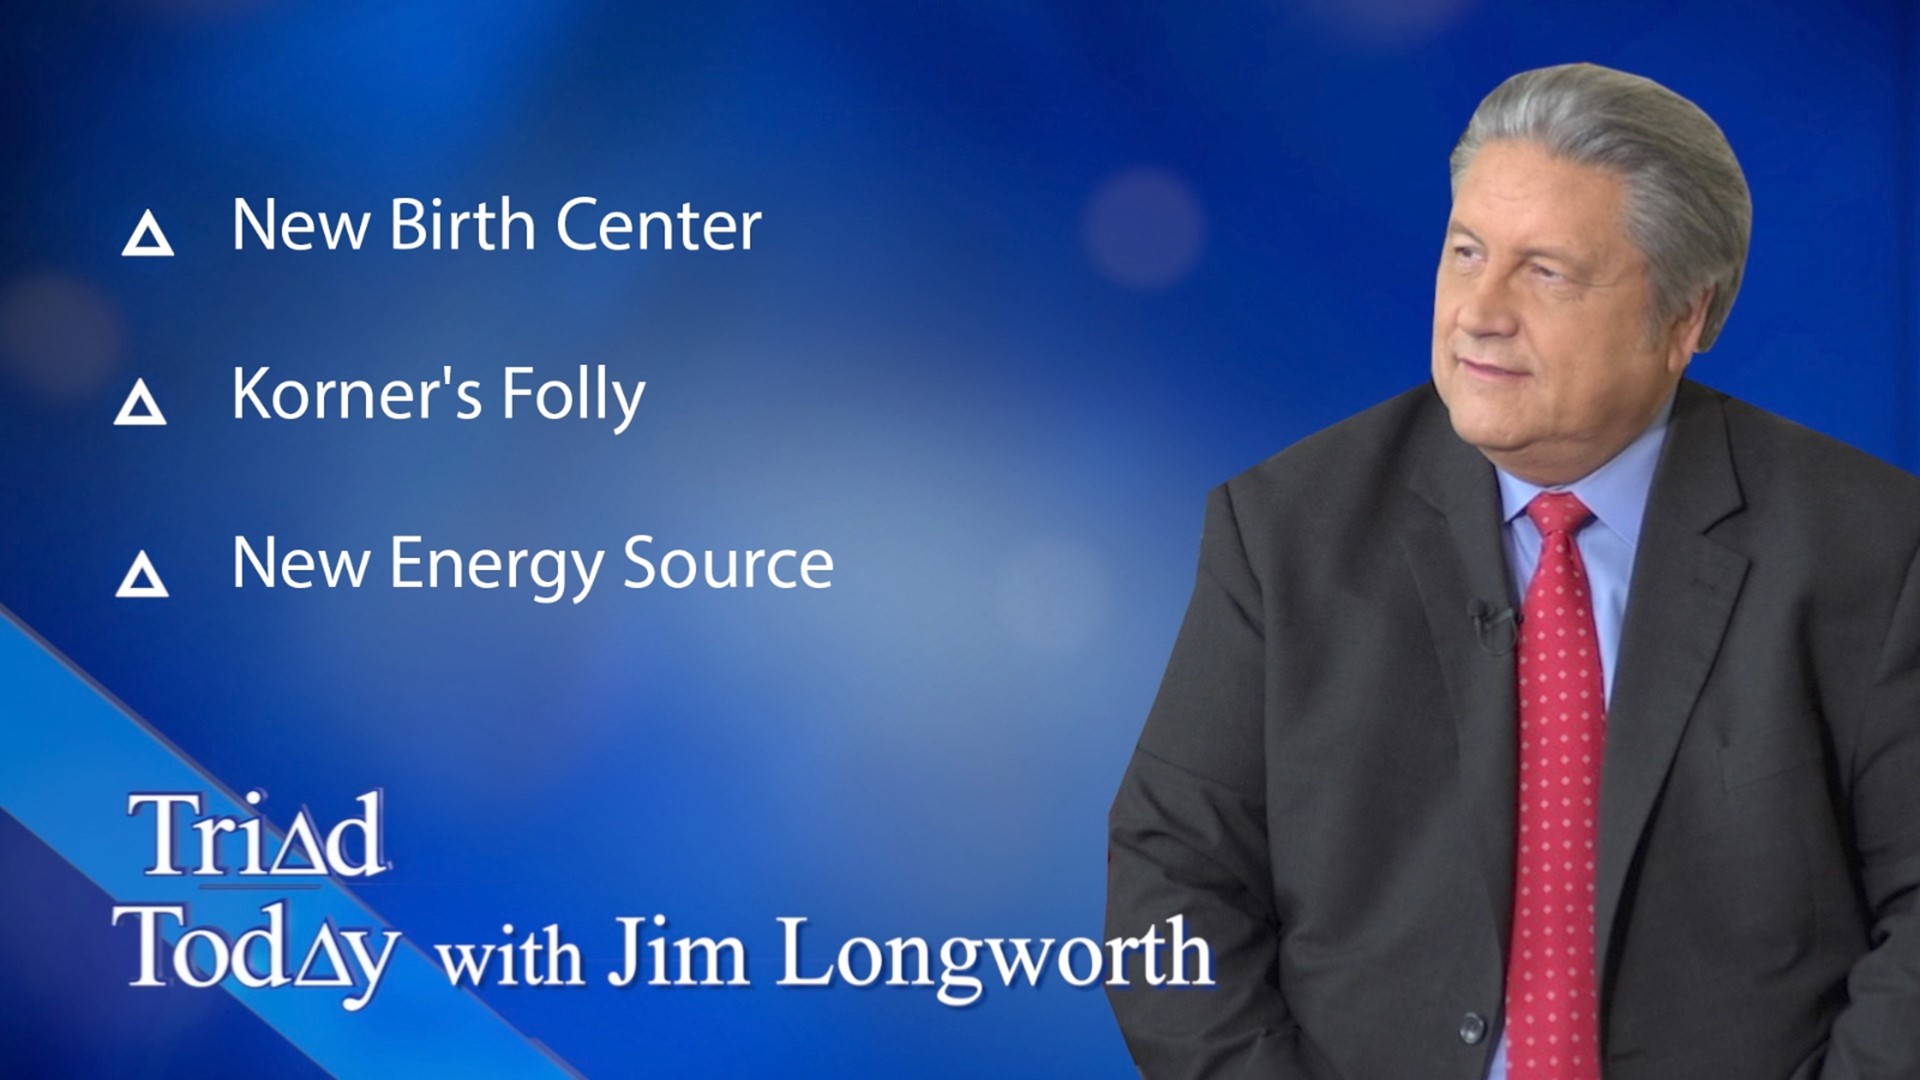 On this episode of Triad Today, New Birth Center, Korner's Folly, New Energy Source